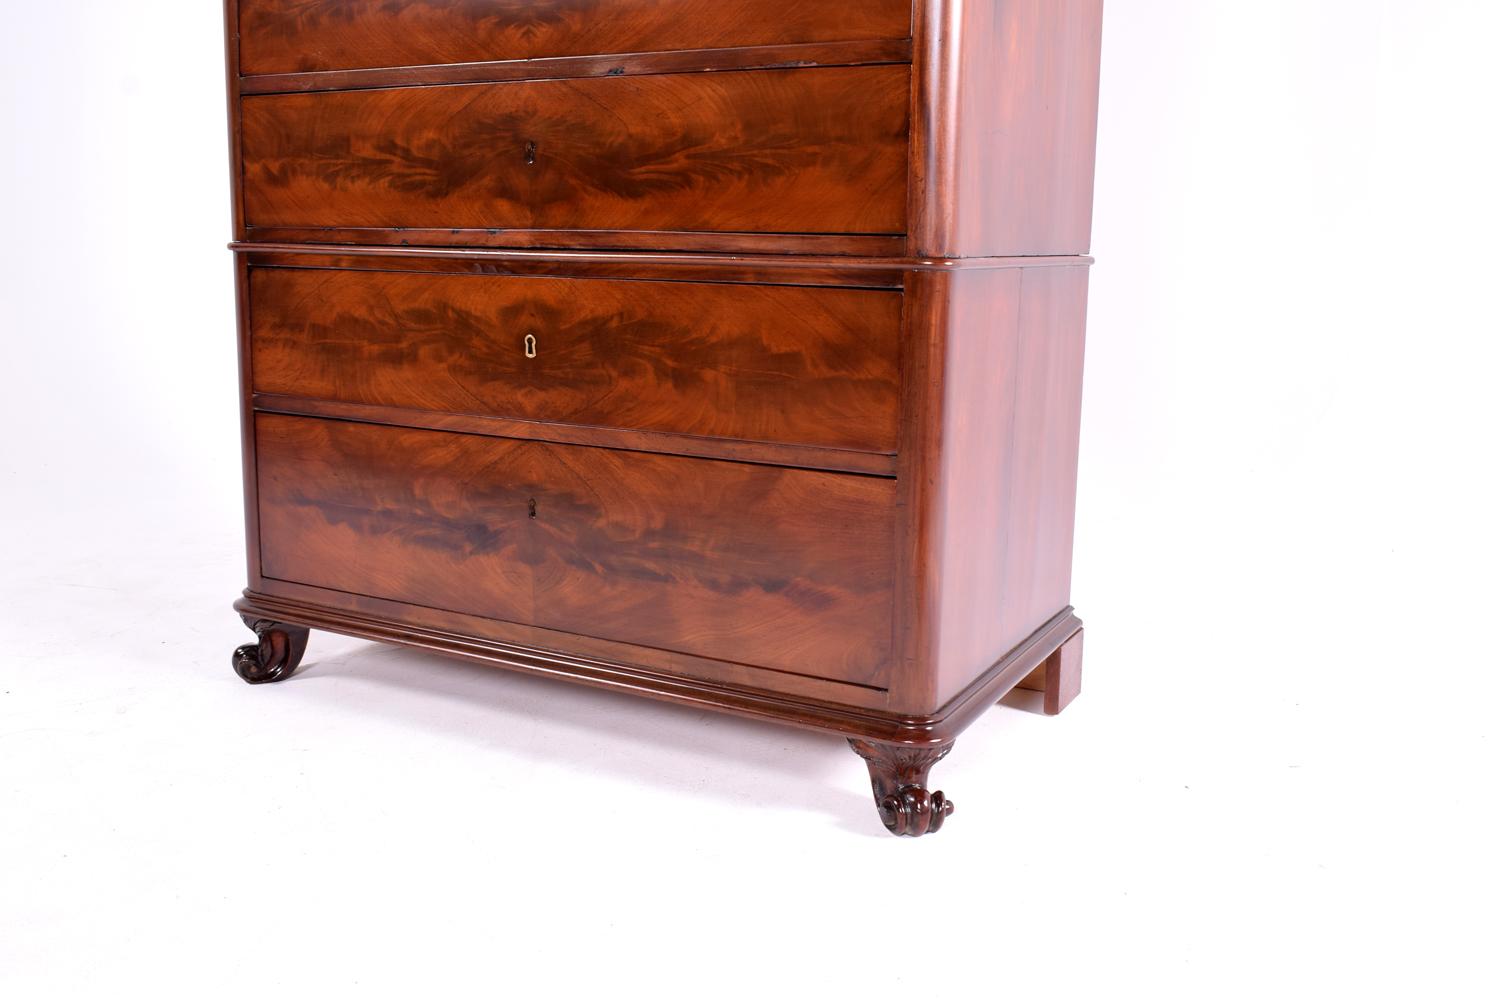 Danish Mid-19th Century Biedermeier Commode Tall Chest of Drawers 4